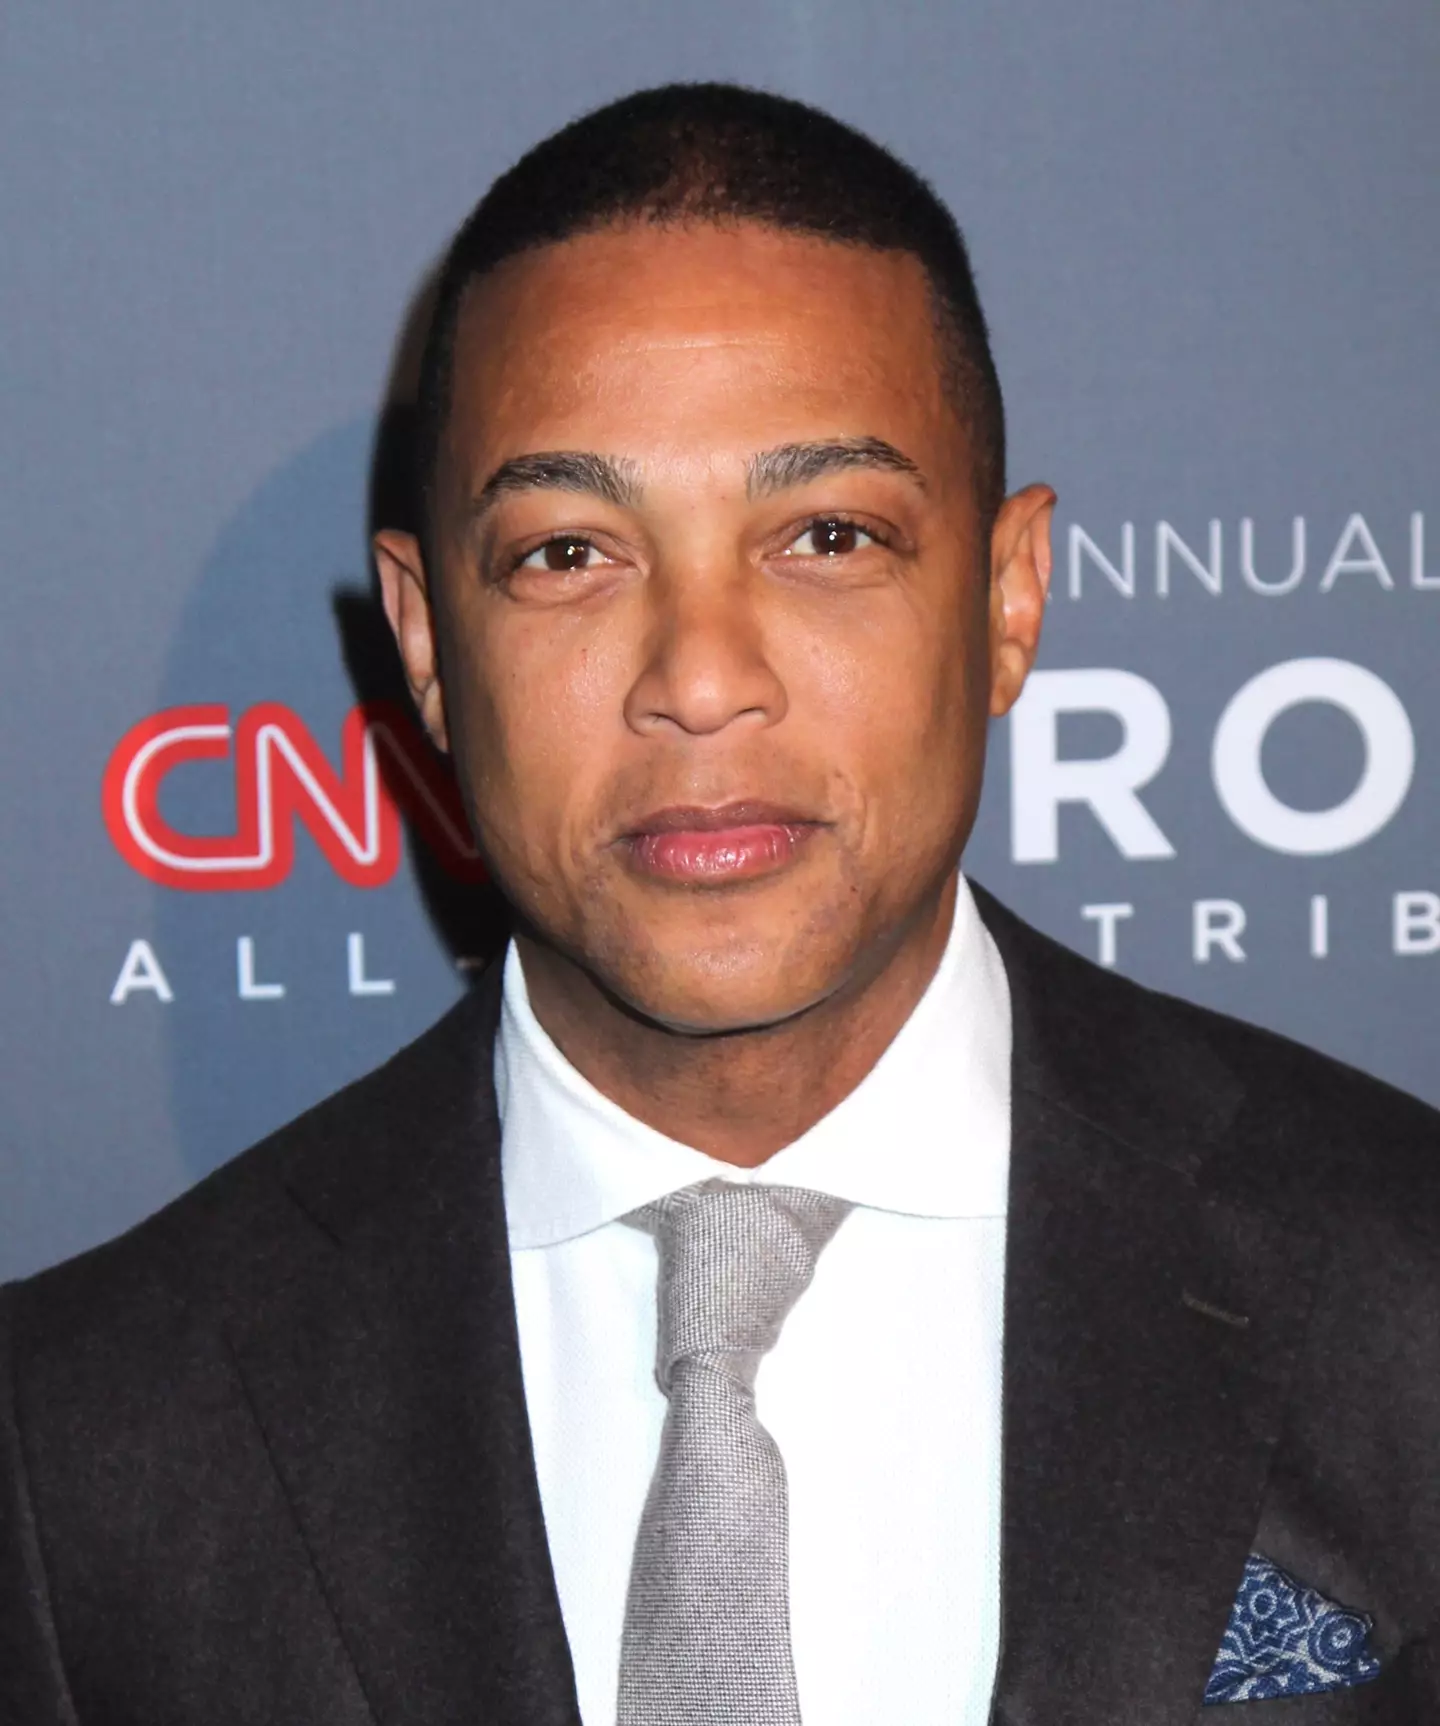 Don Lemon has been fired by CNN after 17 years this afternoon (24 April).